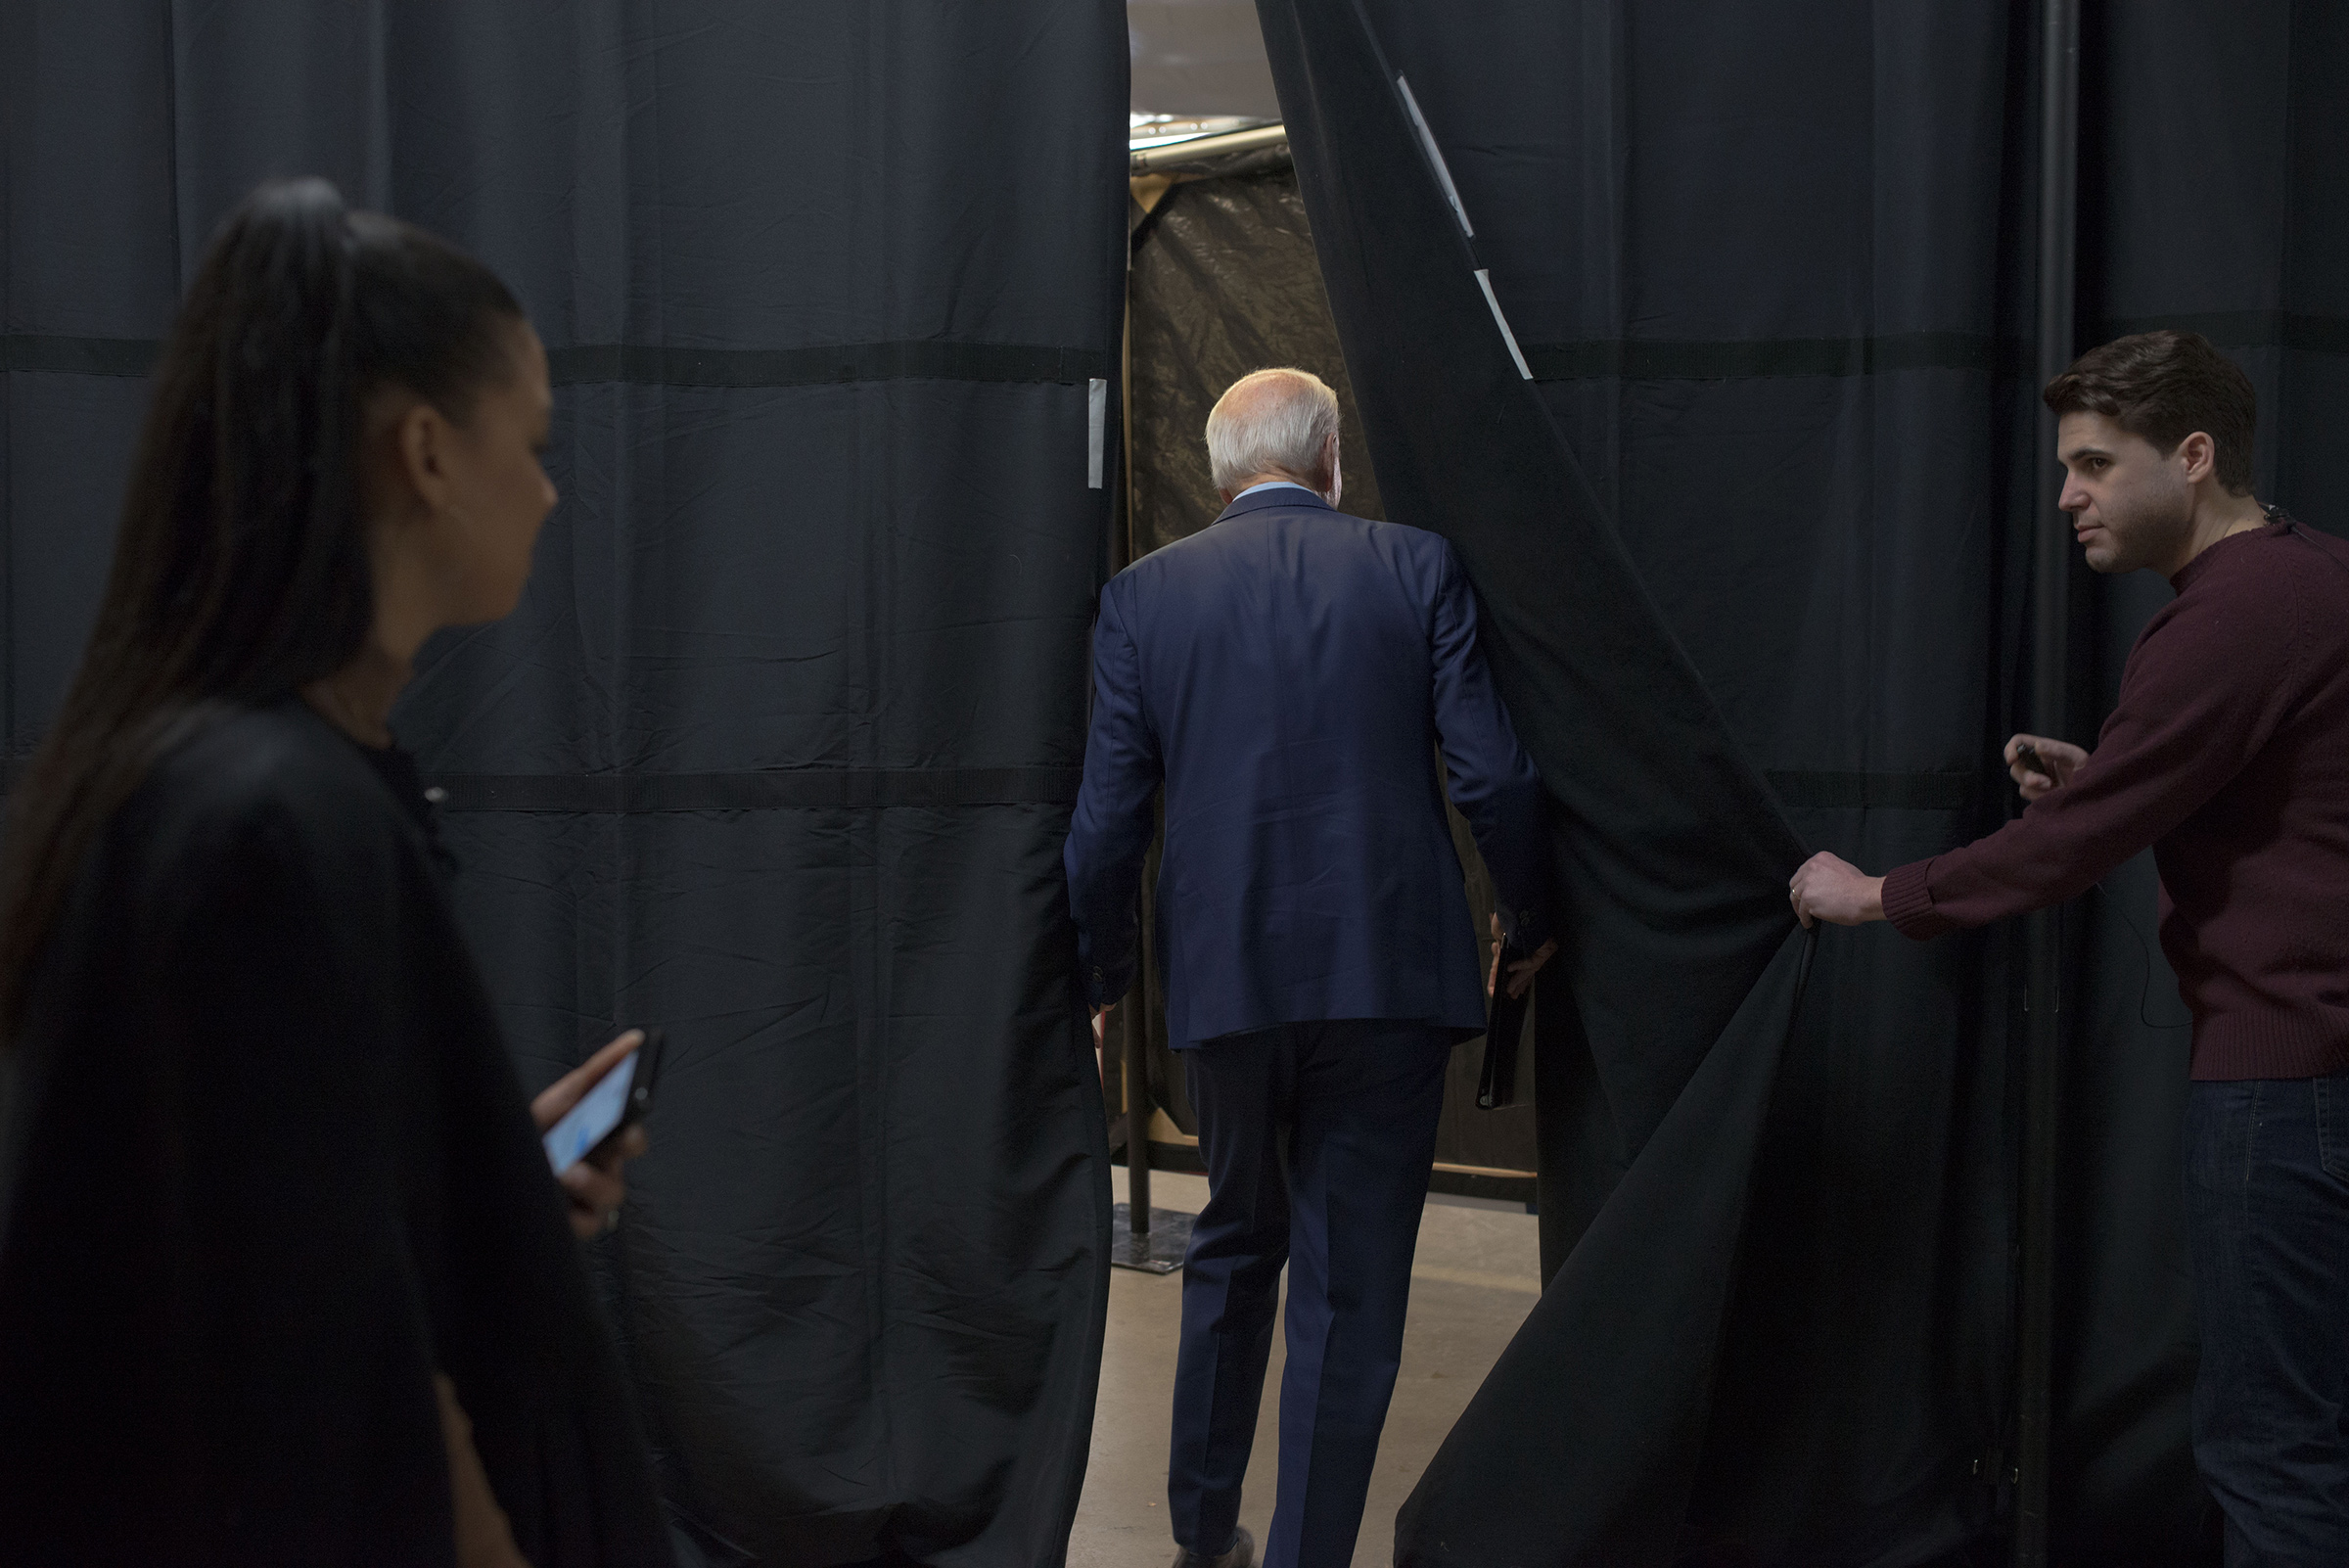 Biden waits backstage before his campaign event in Mason City (September Dawn Bottoms for TIME)